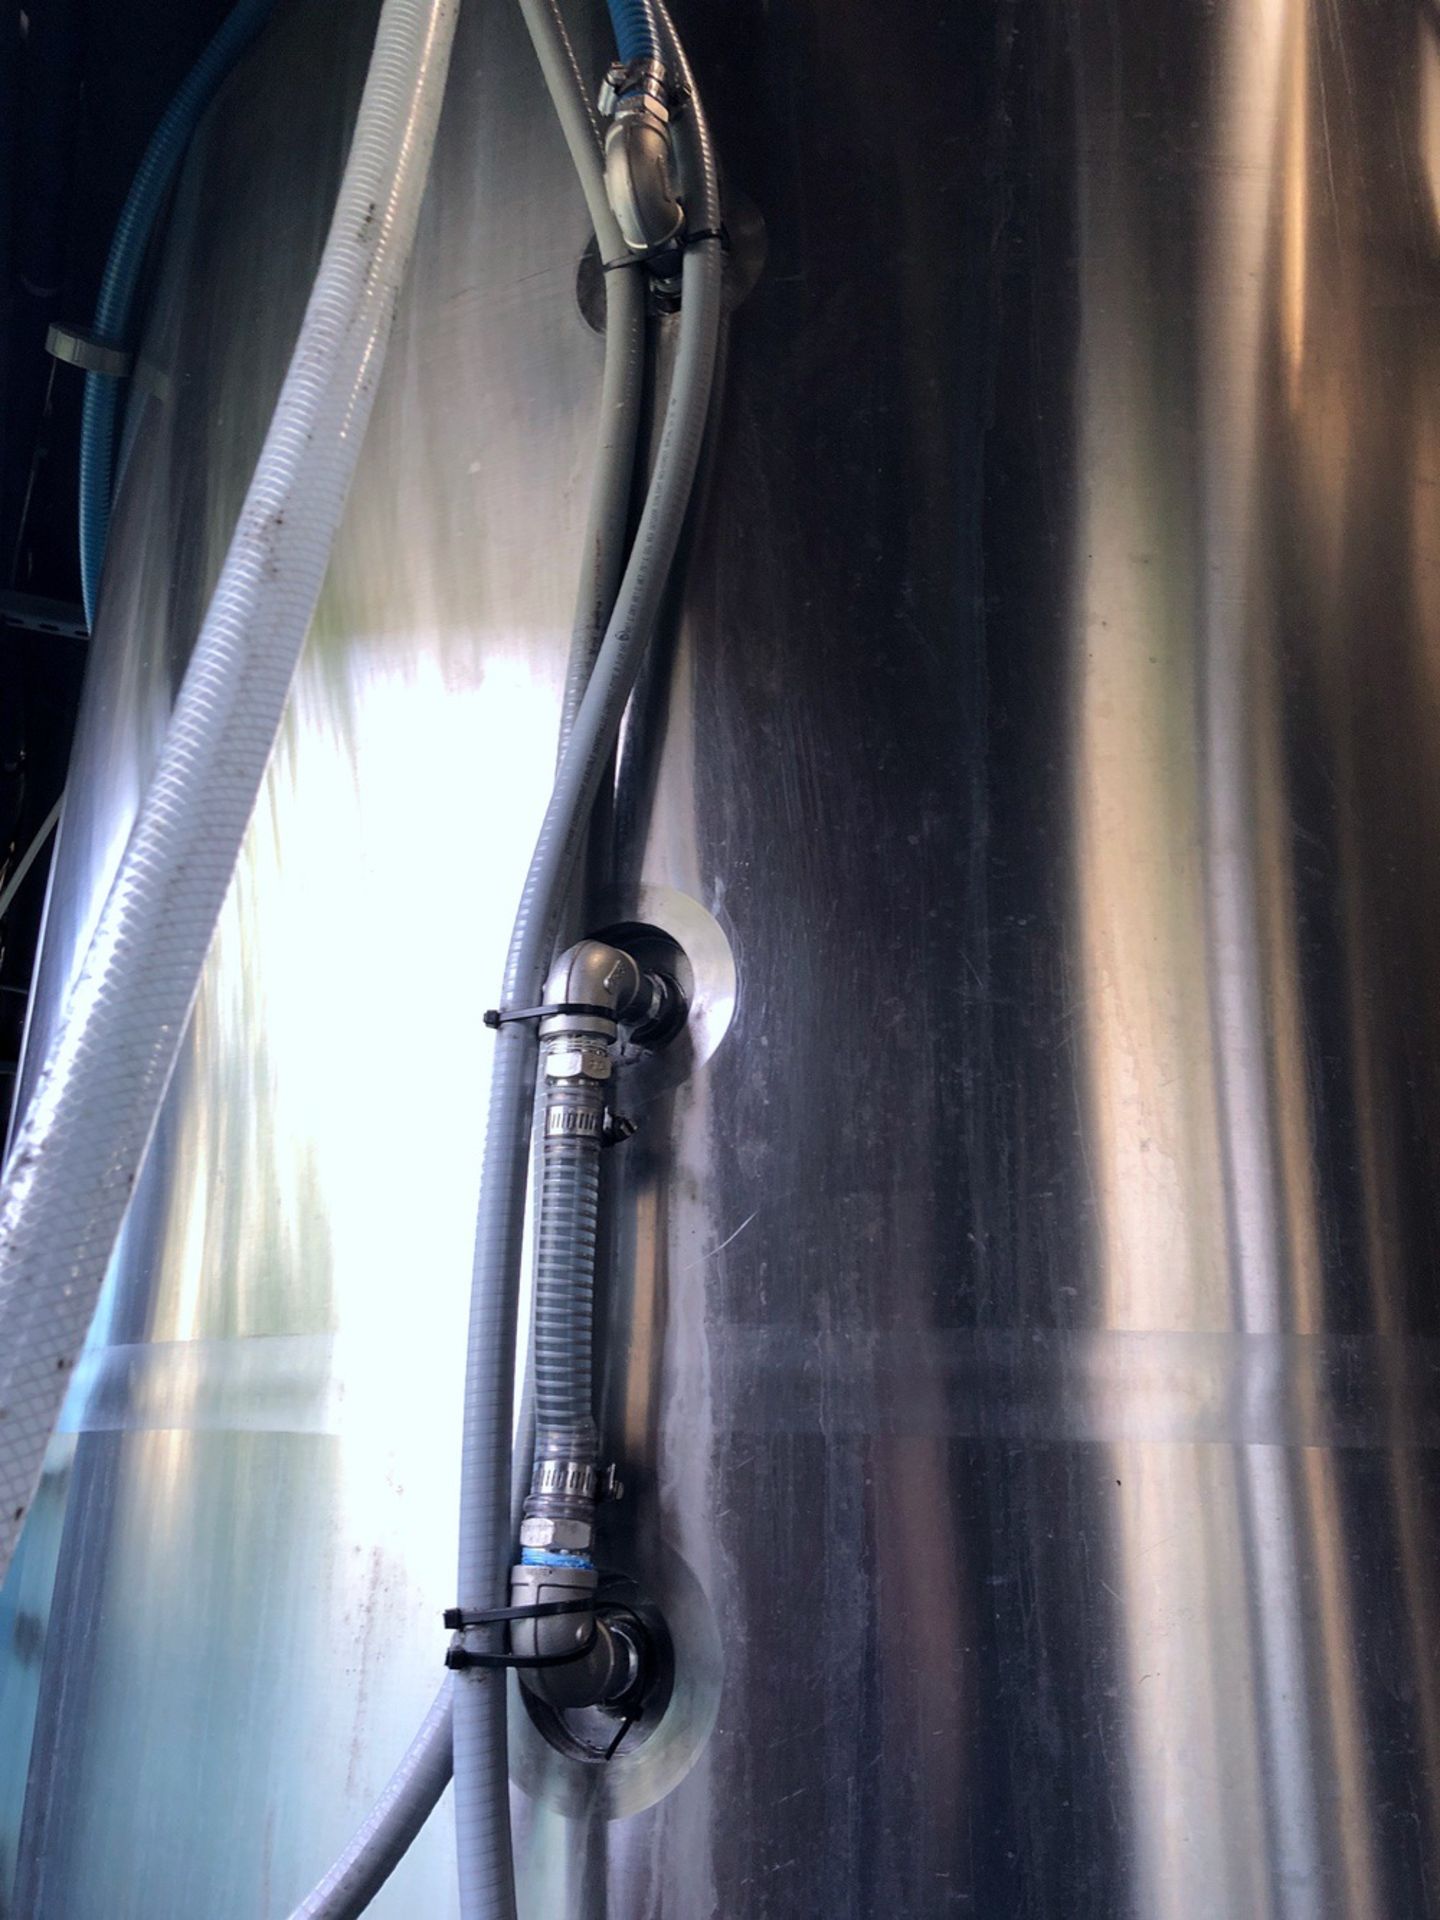 2011 Premier Stainless 30 BBL Brite Tank, Glycol Jacketed, Approx Di - Subj to Bulk | Rig Fee: $950 - Image 5 of 5